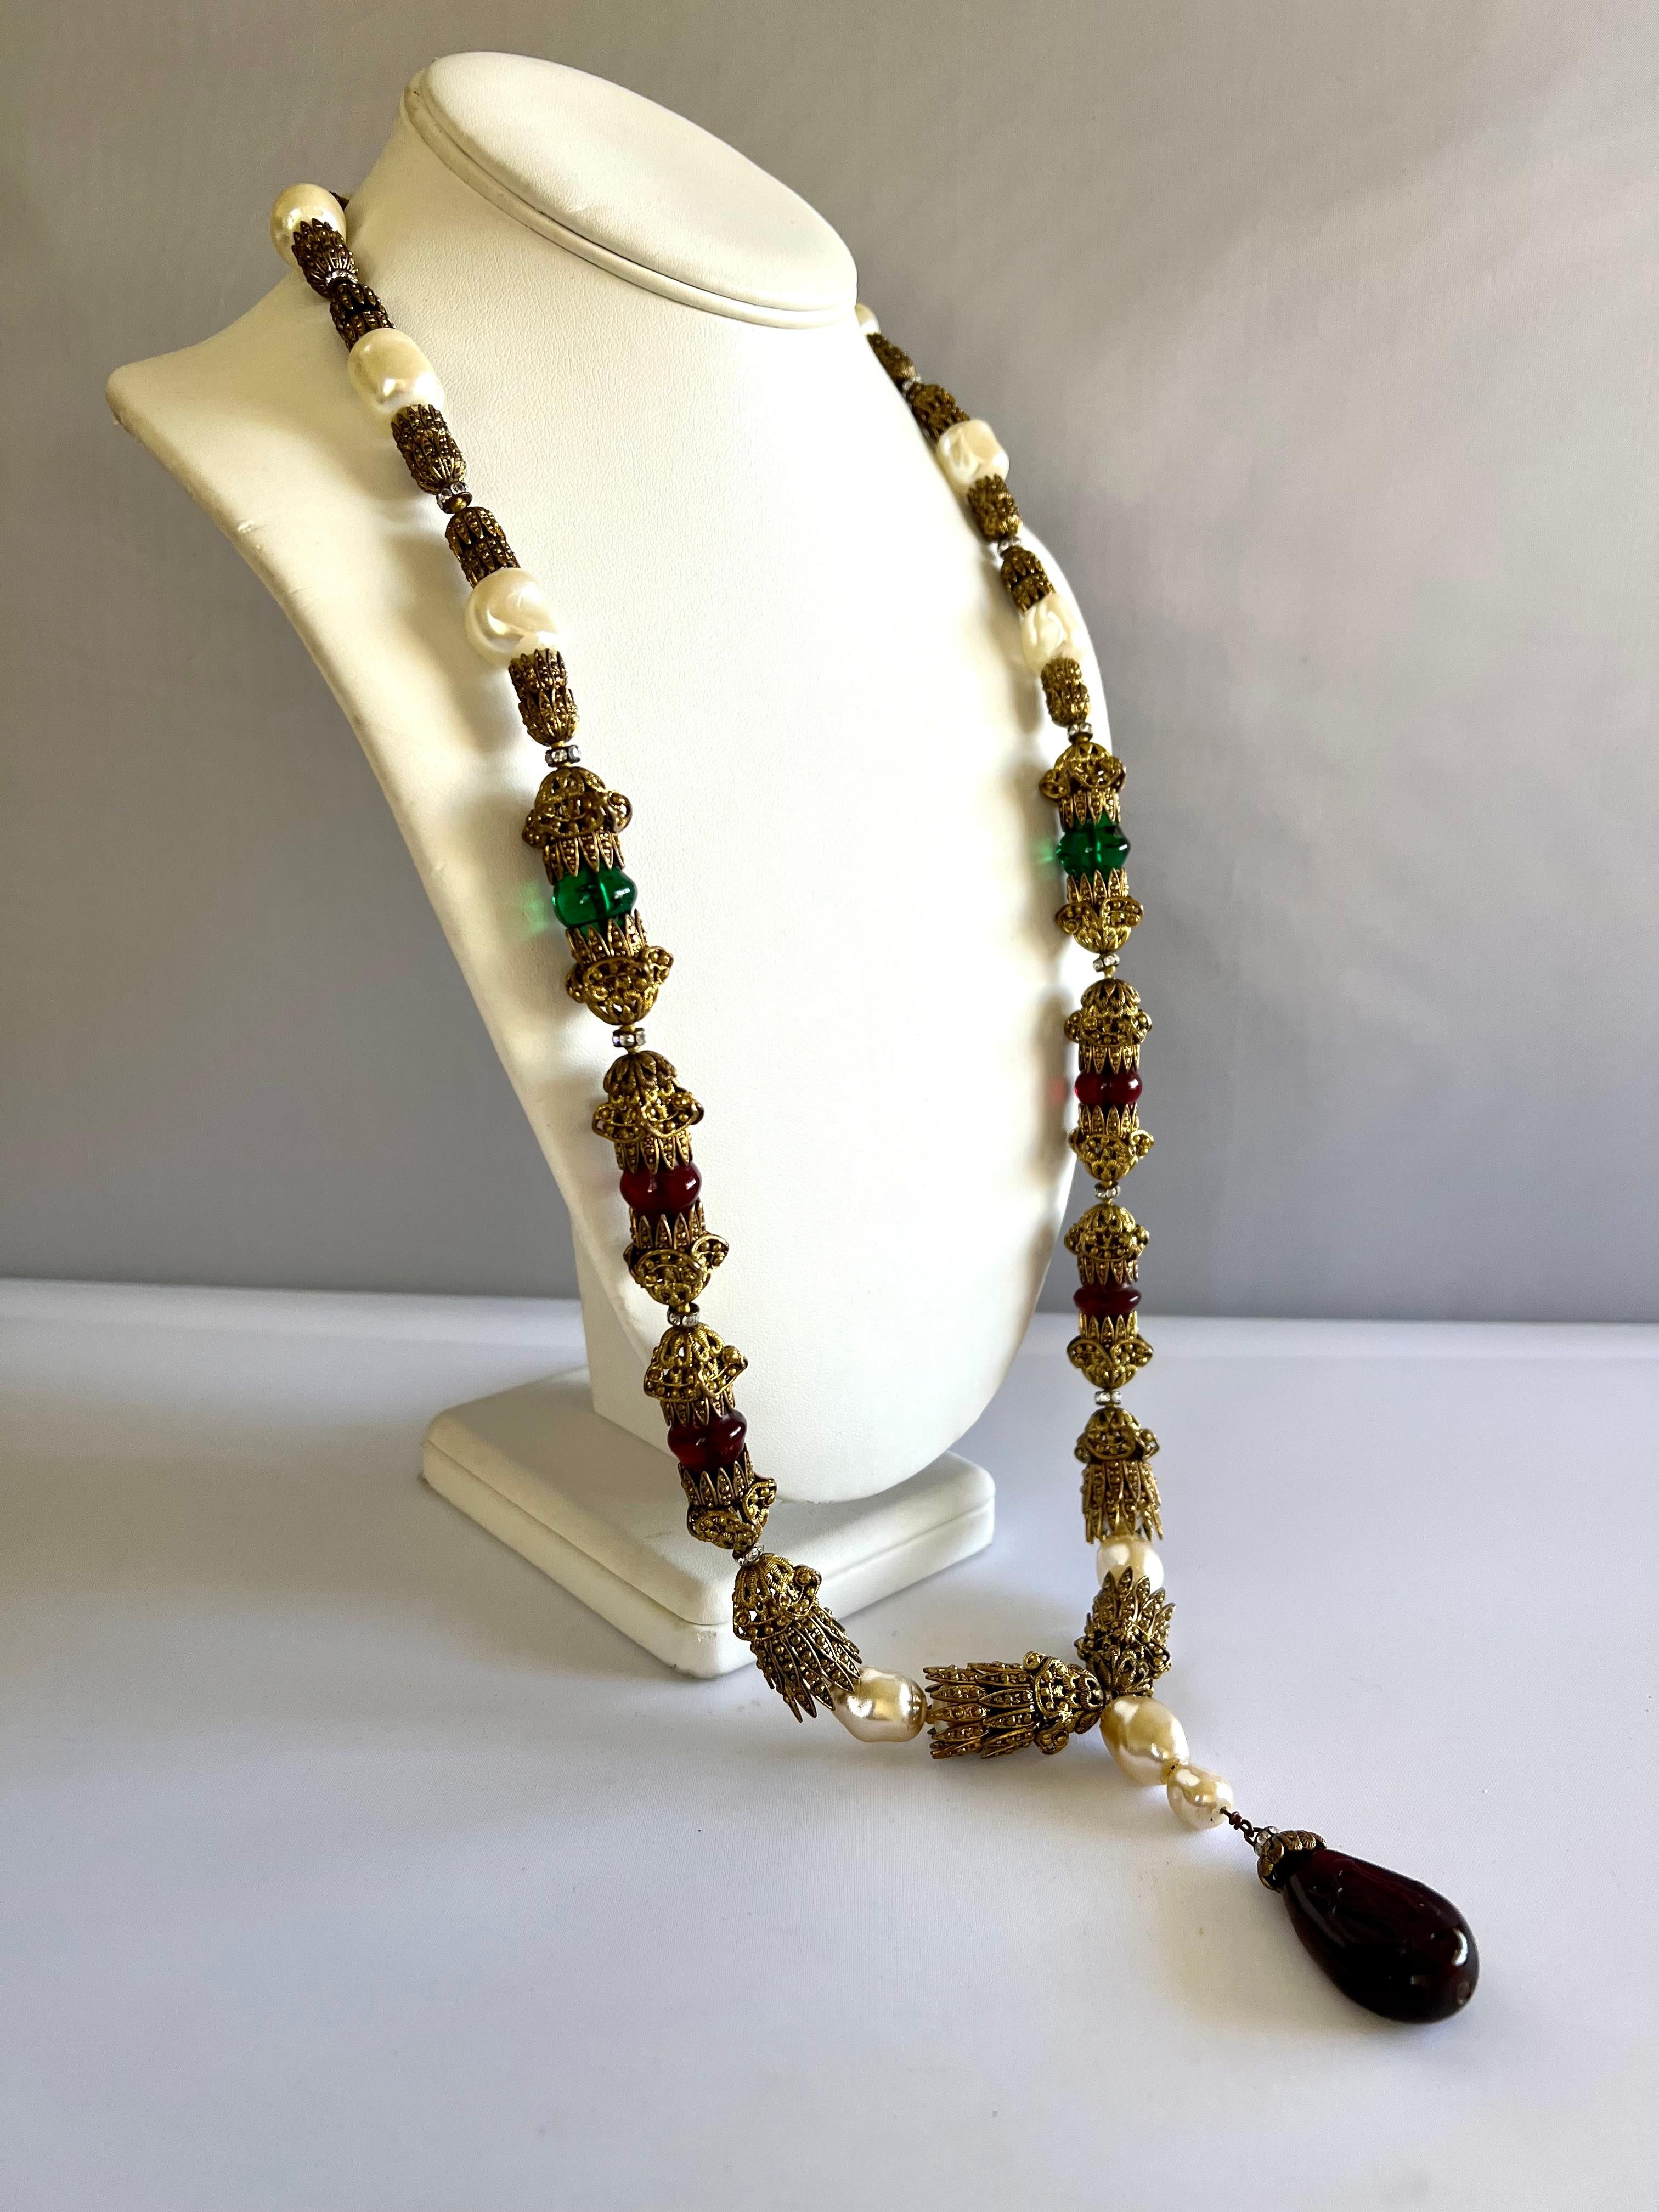 Women's Vtg Chanel Ornate Renaissance Pearl and Simulated Gemstone Statement Necklace  For Sale